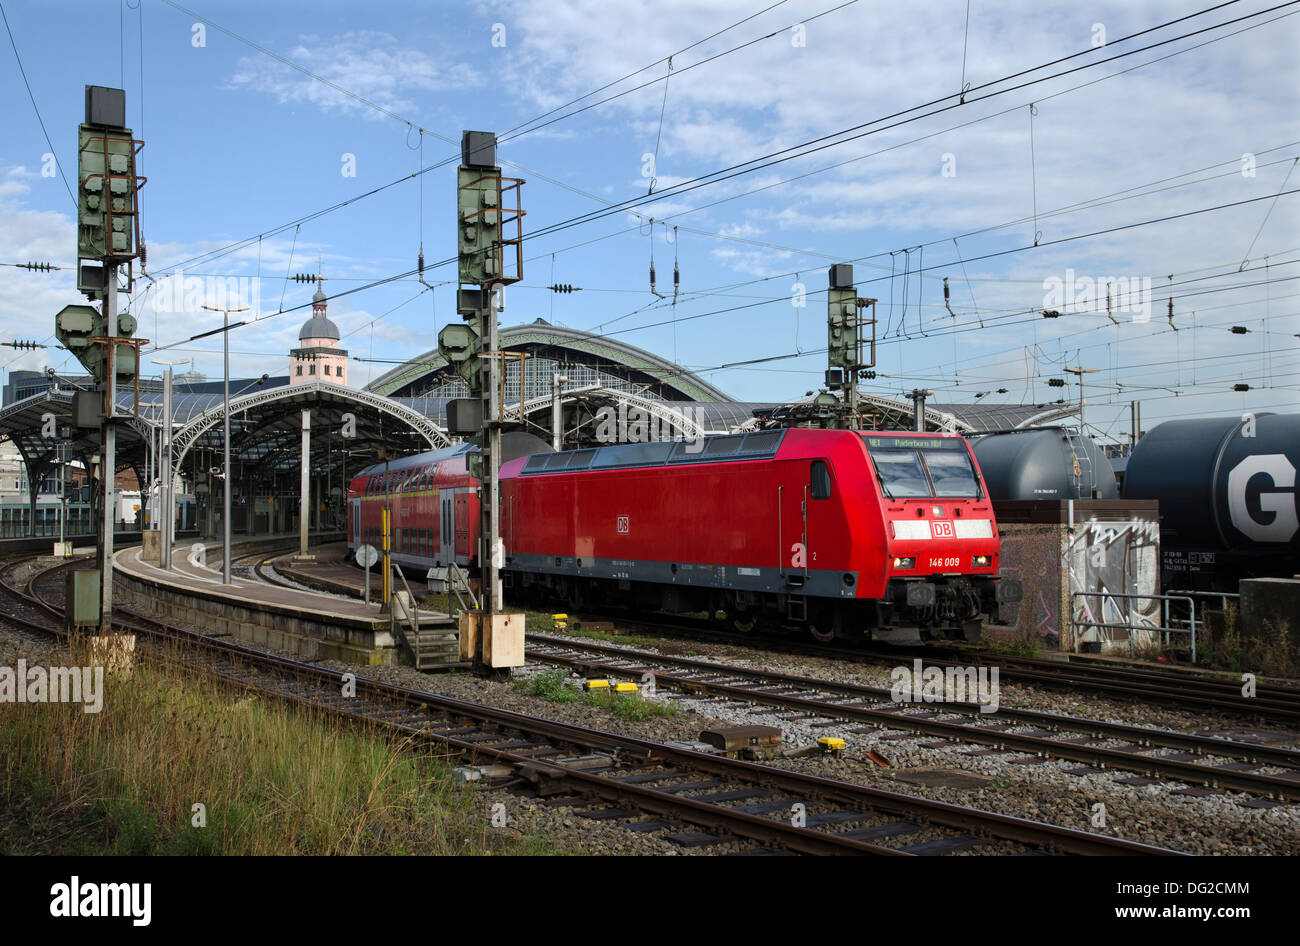 Electric train with class 146 locomotive 146009 leaving koln hbf cologne germany Stock Photo